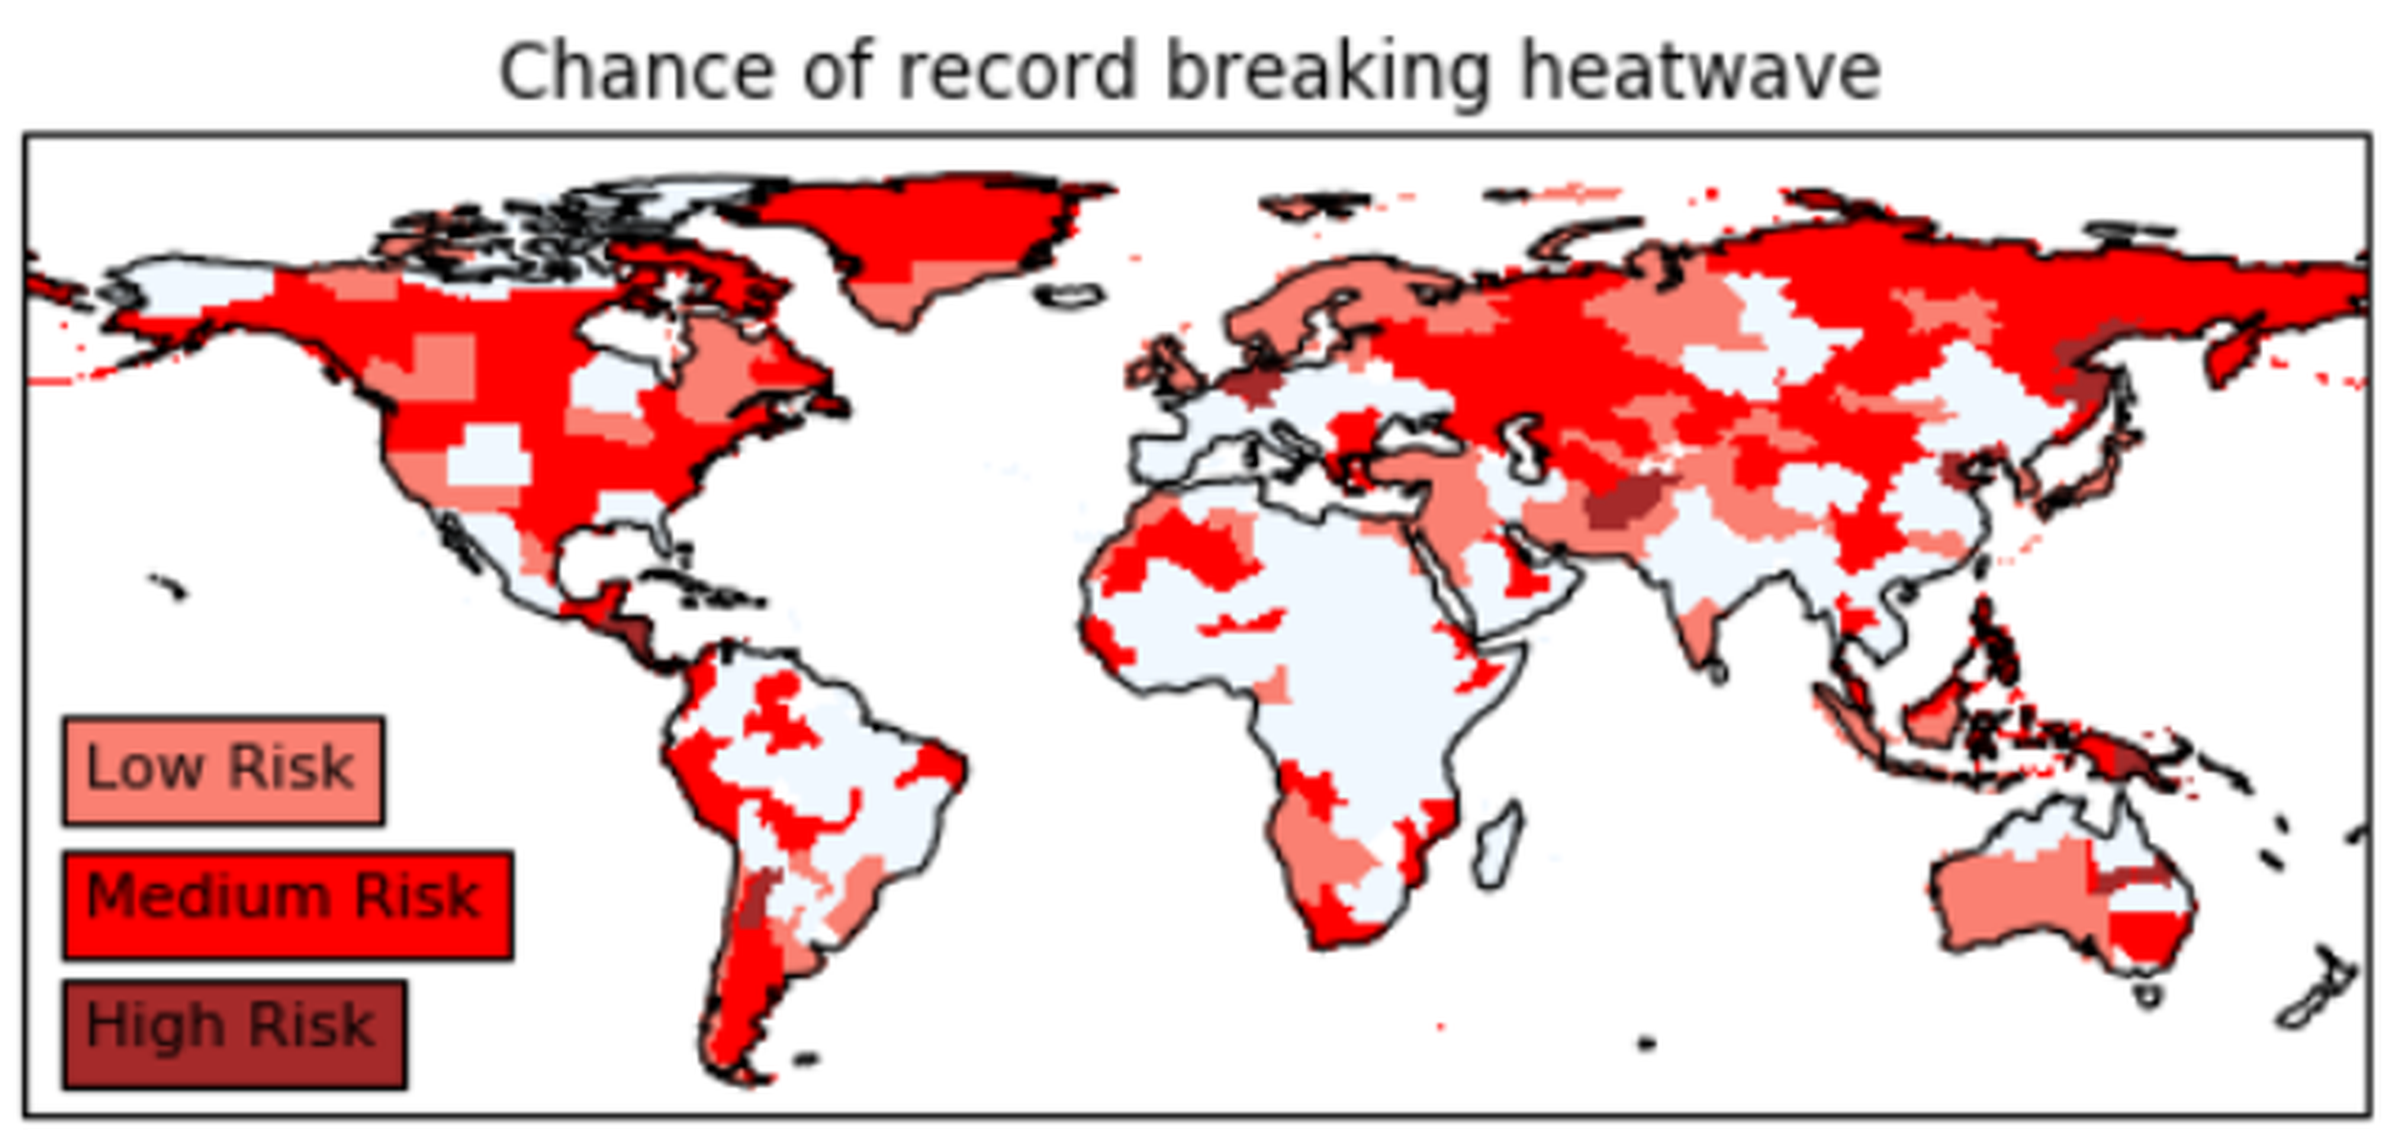 A map showing where record-breaking heatwaves are most likely, according to the new research. Regions of “low risk” have already experienced heatwaves that seemed implausible before they occurred.